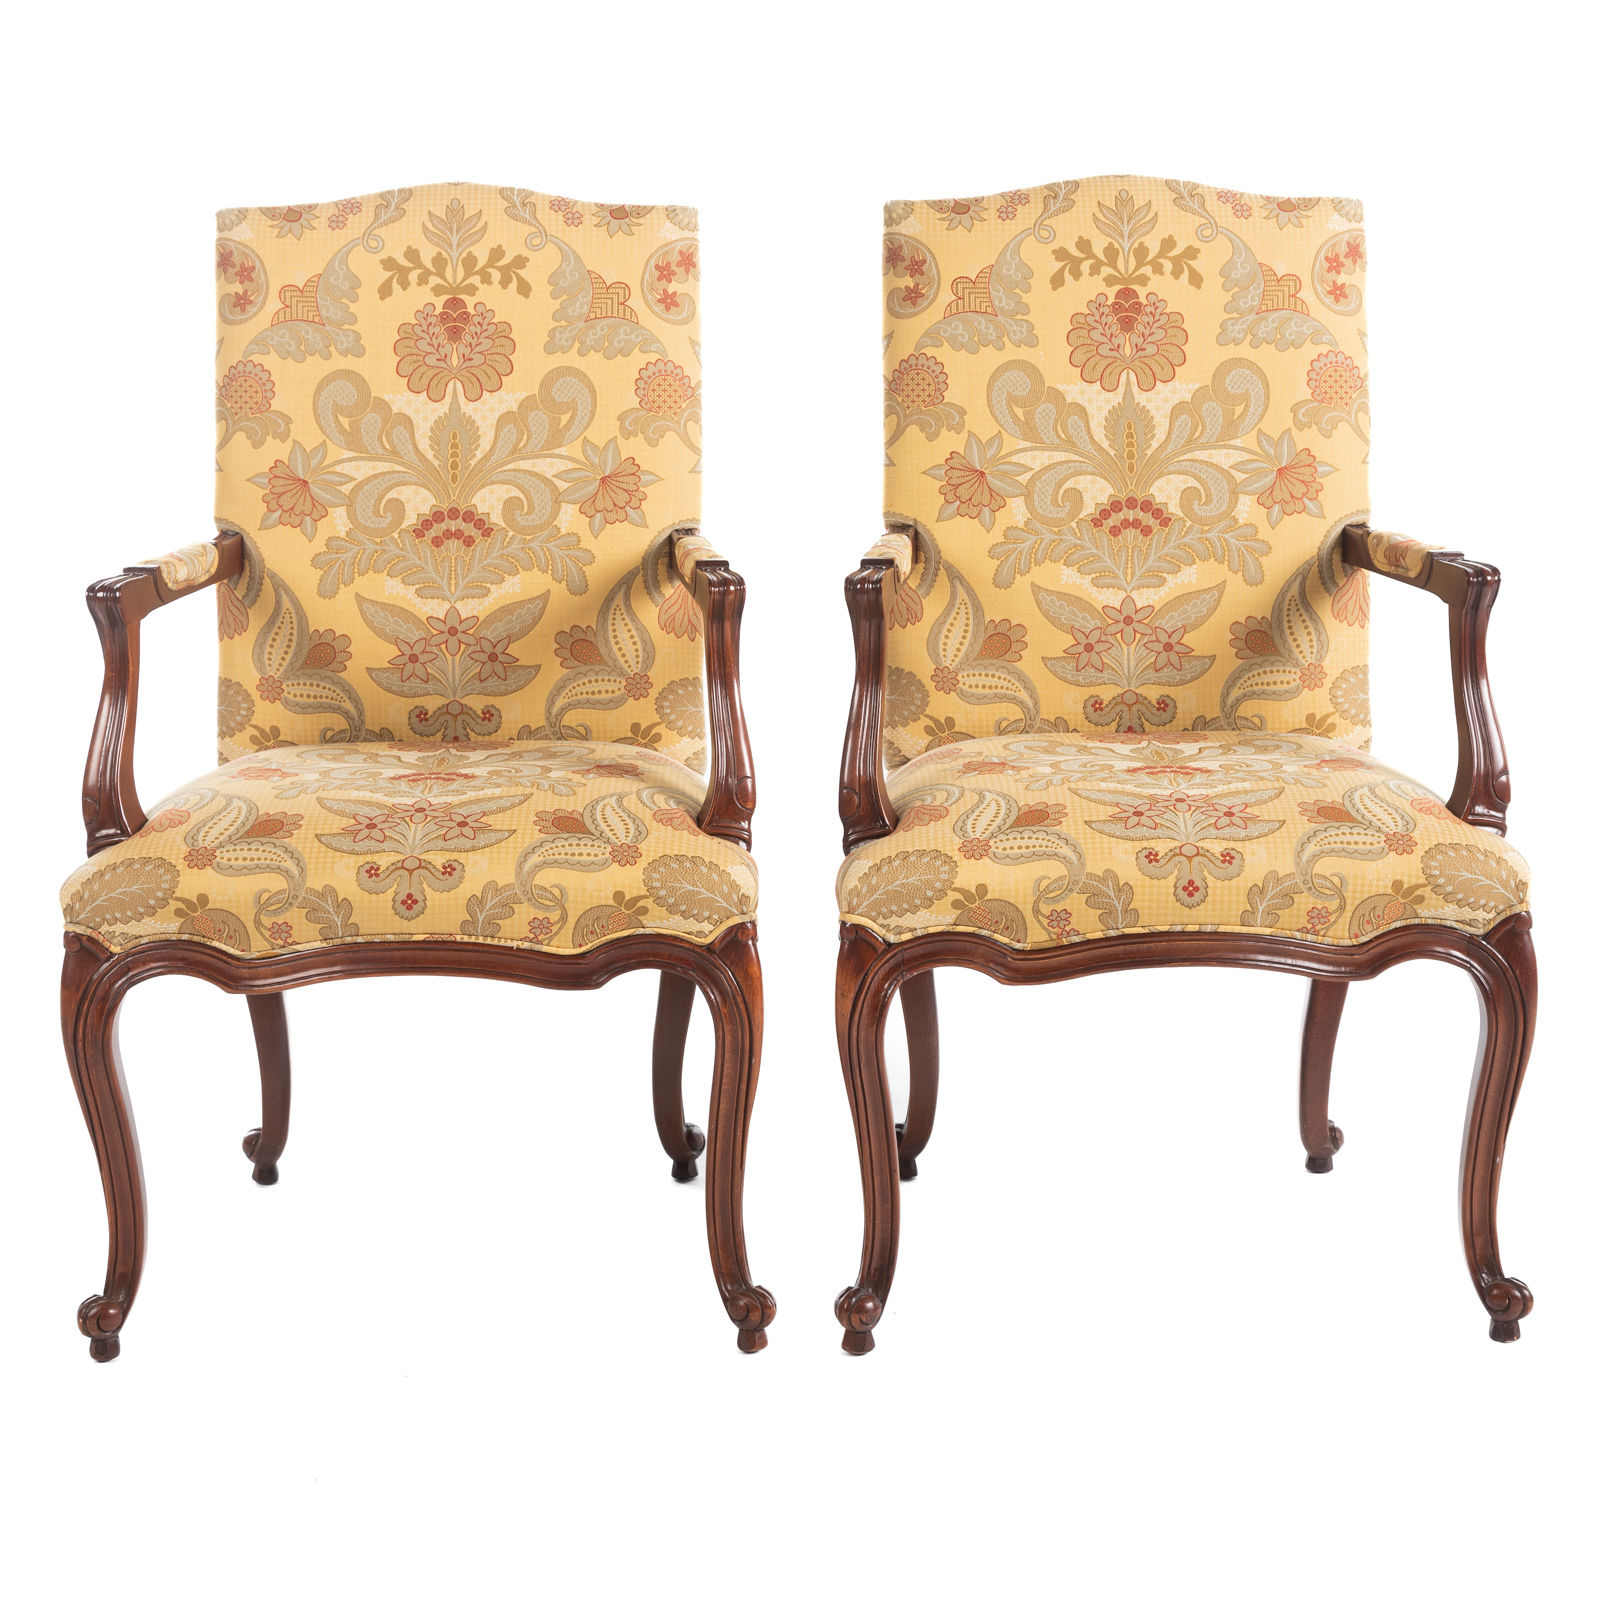 A PAIR OF HICKORY CHAIR LOUIS XV